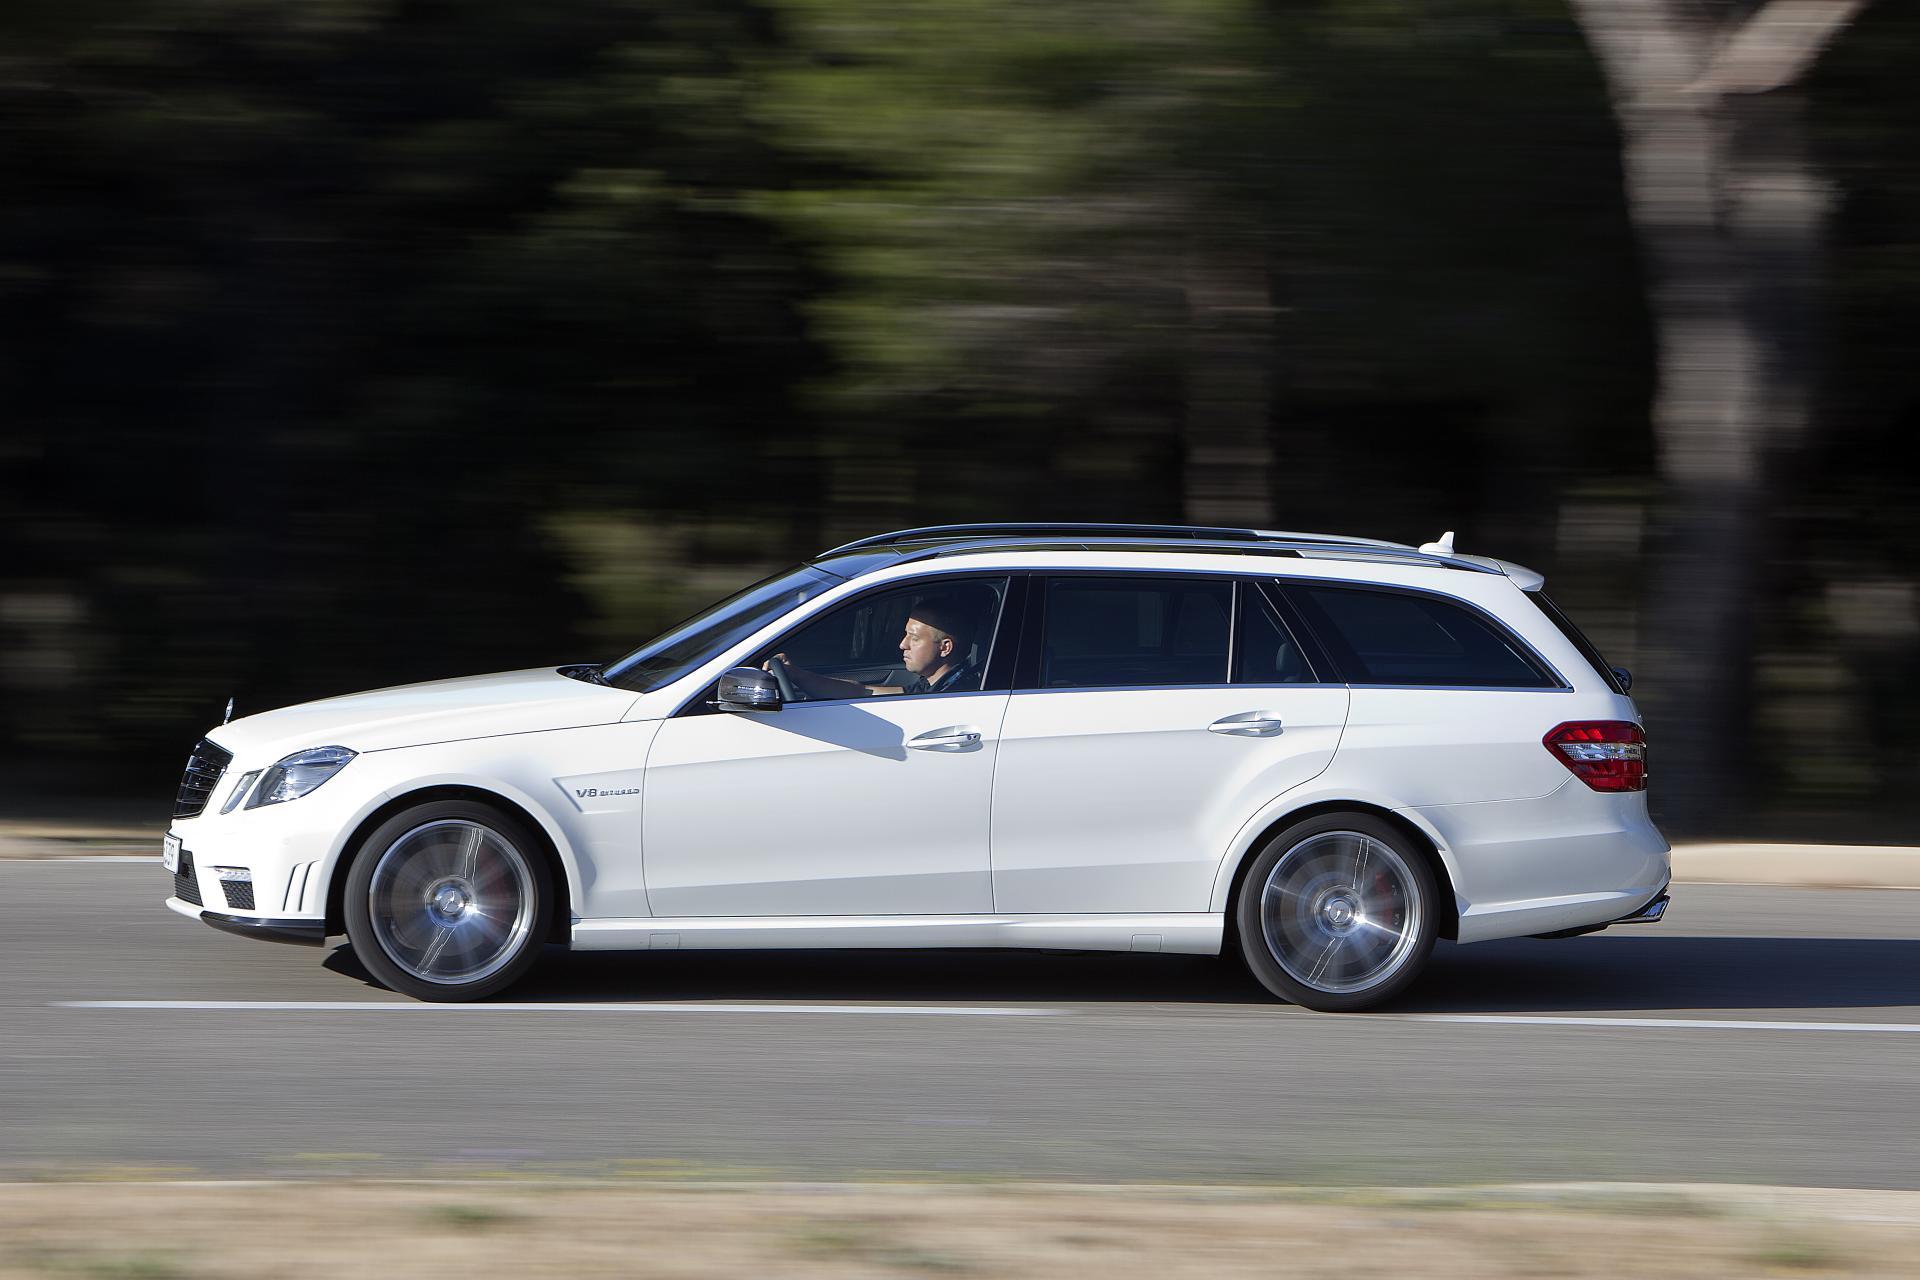 Mercedes Benz E63 AMG Wagon Wallpaper And Image Gallery